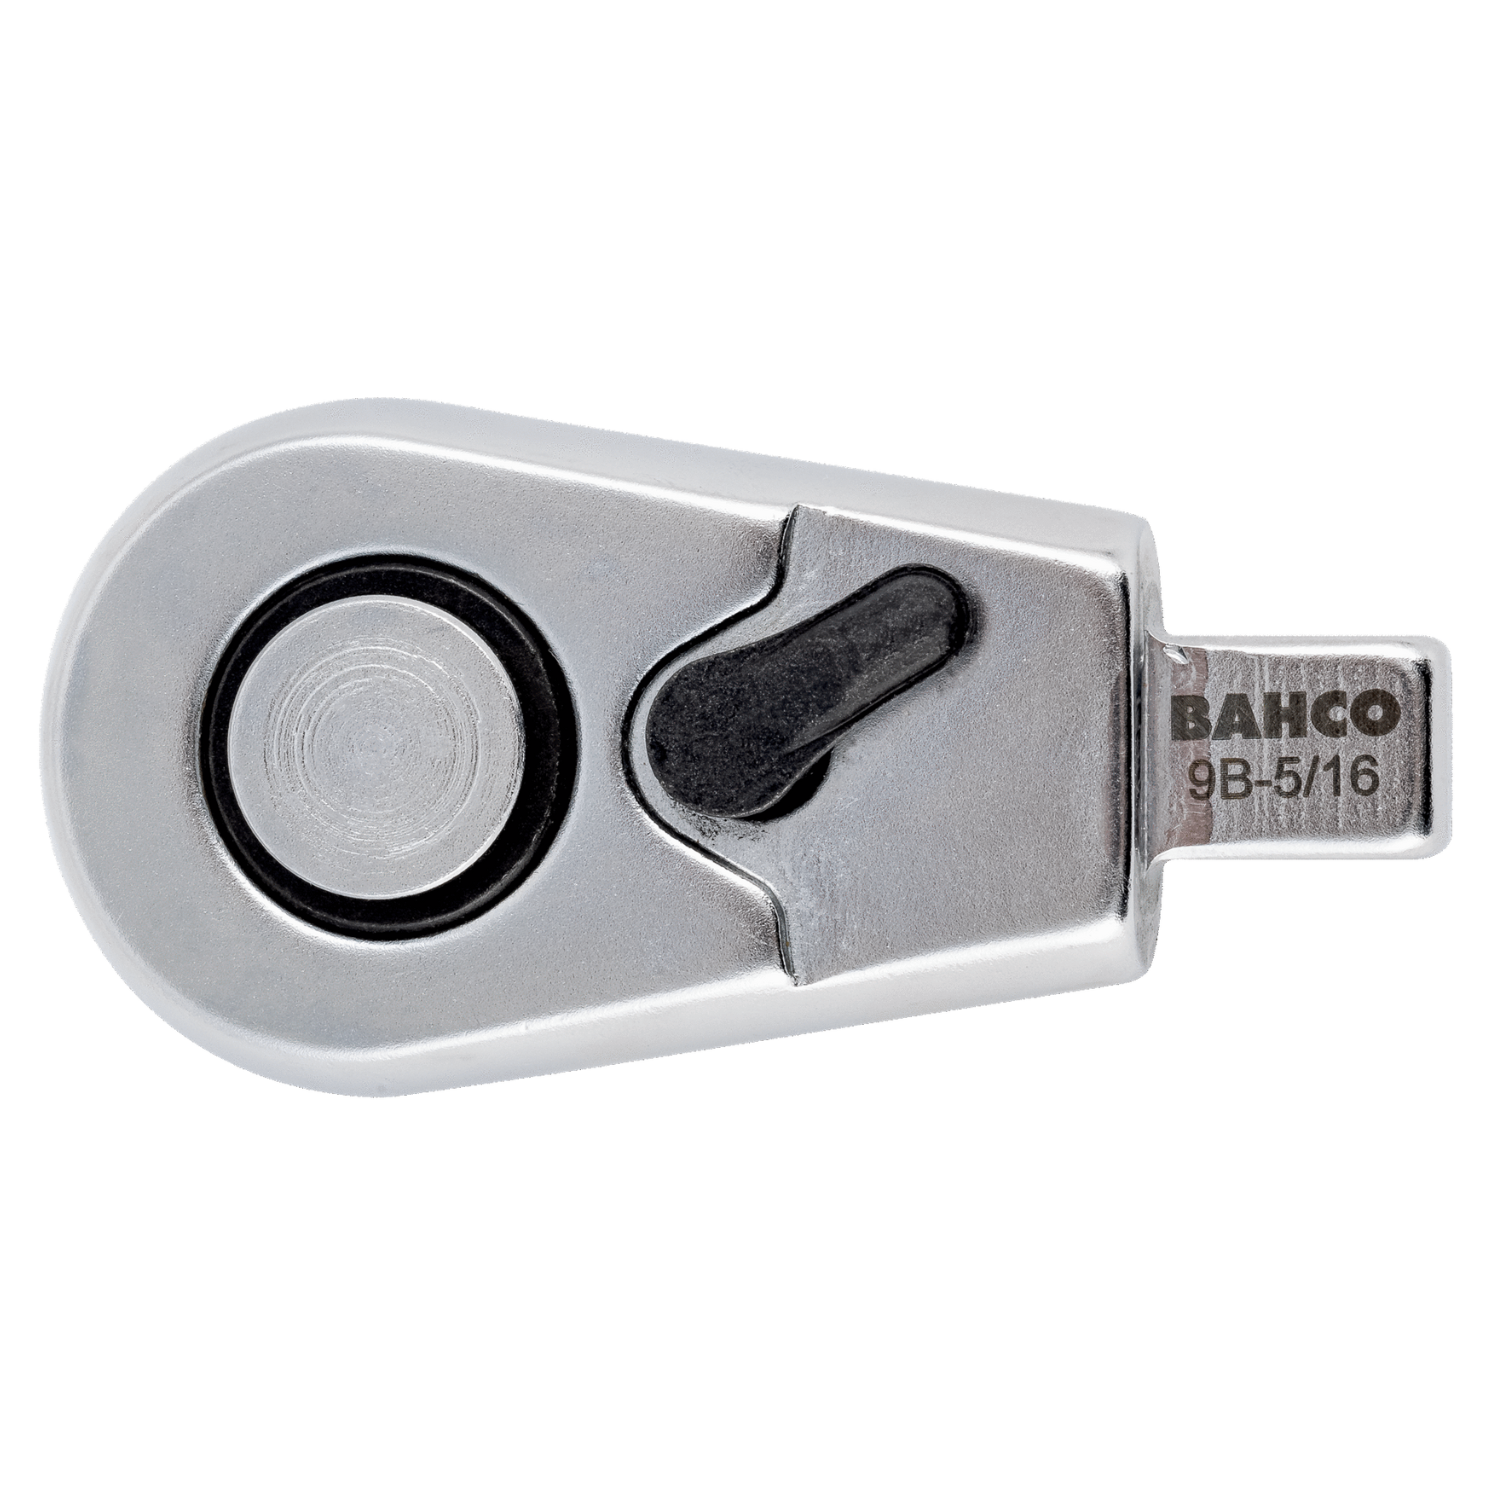 BAHCO 9B Ratchet Head for Screwdriver Bits with Connector - Premium Ratchet Head from BAHCO - Shop now at Yew Aik.